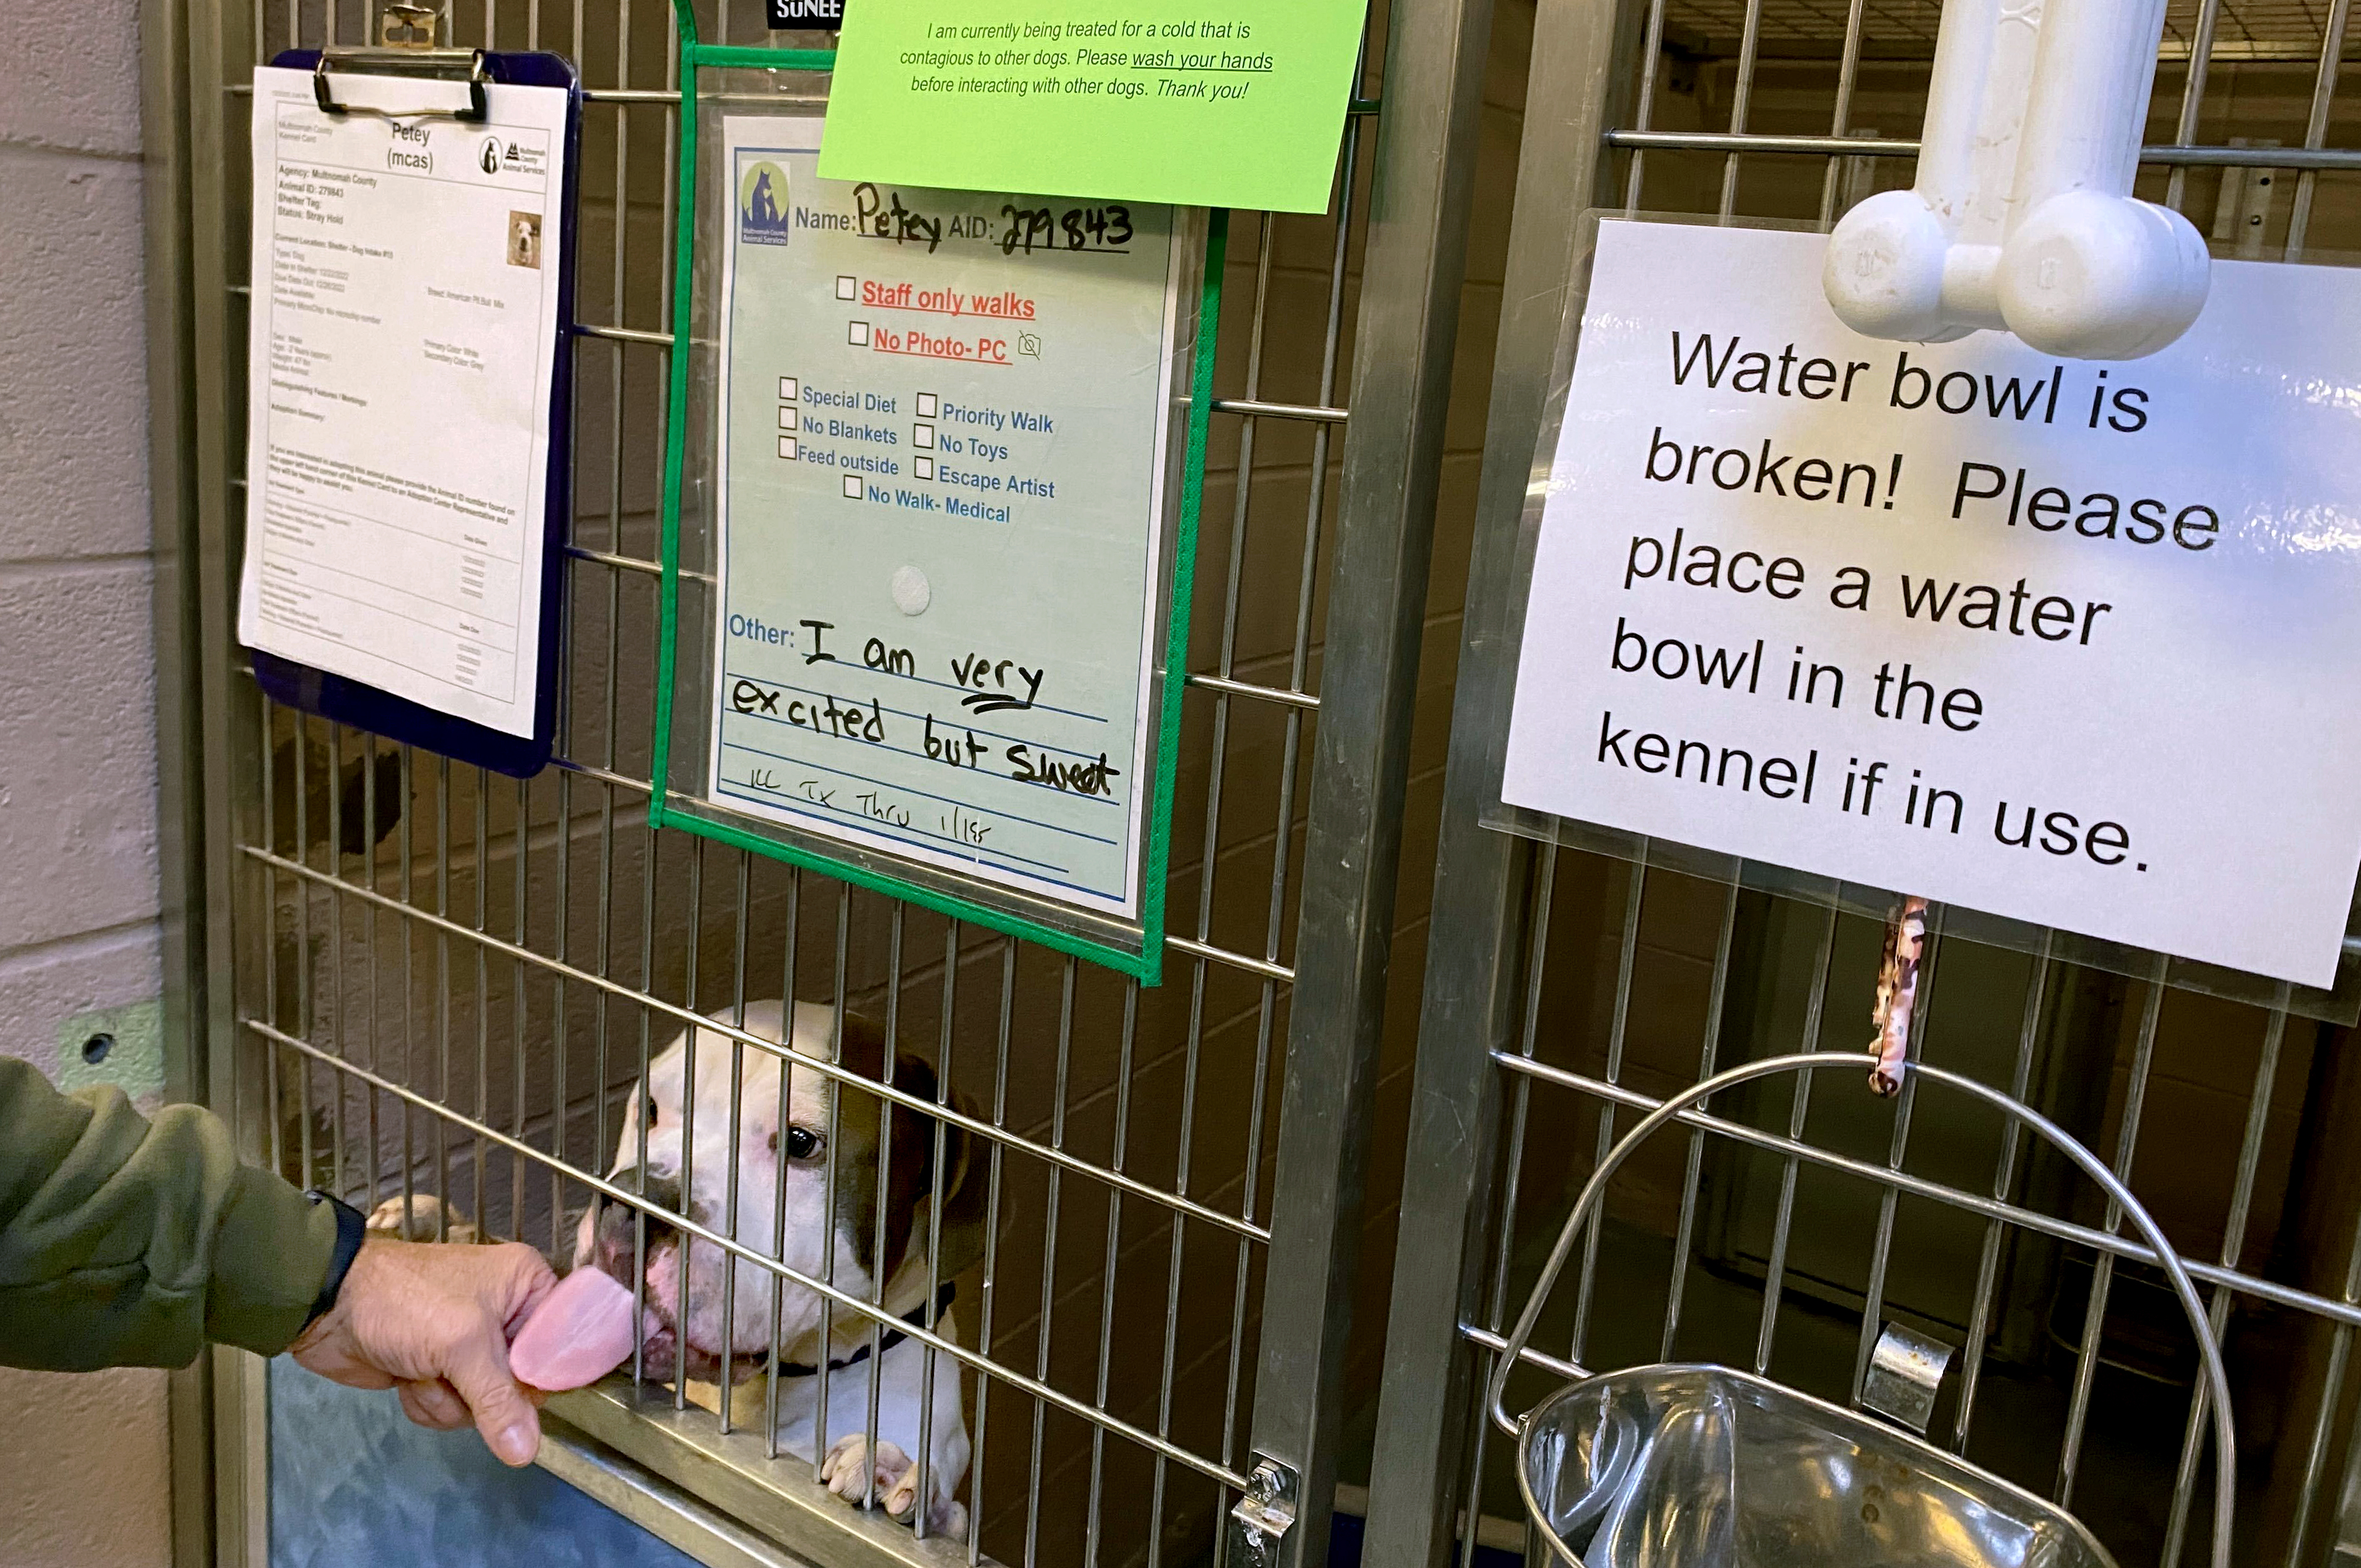 Animal care dipped to staggering lows as Multnomah County shelter reached  crisis, records show - OPB